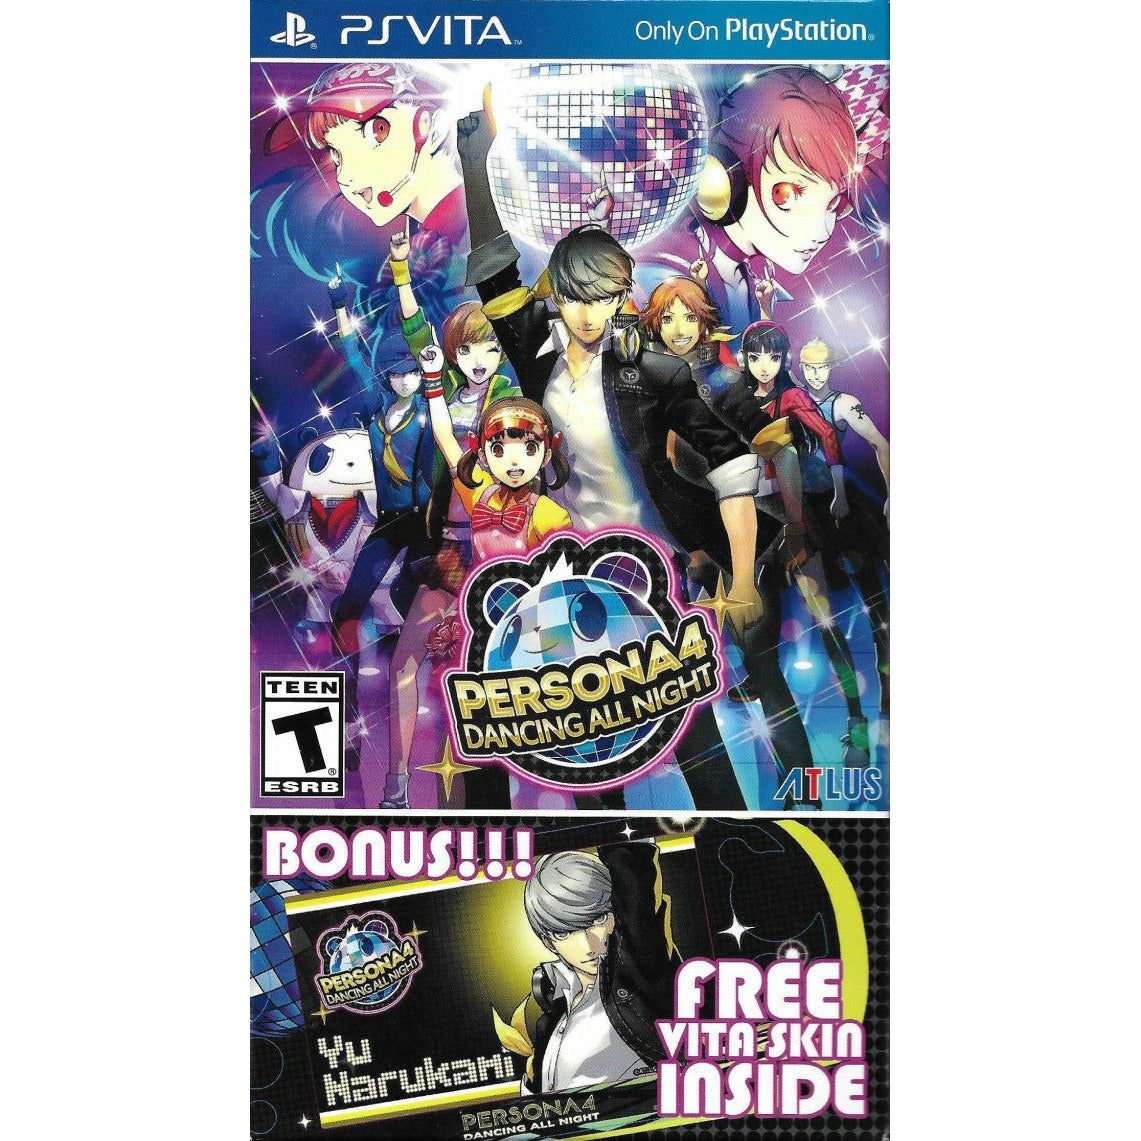 VITA - Persona 4 Dancing All Night (Launch Edition) (Sealed Contents)